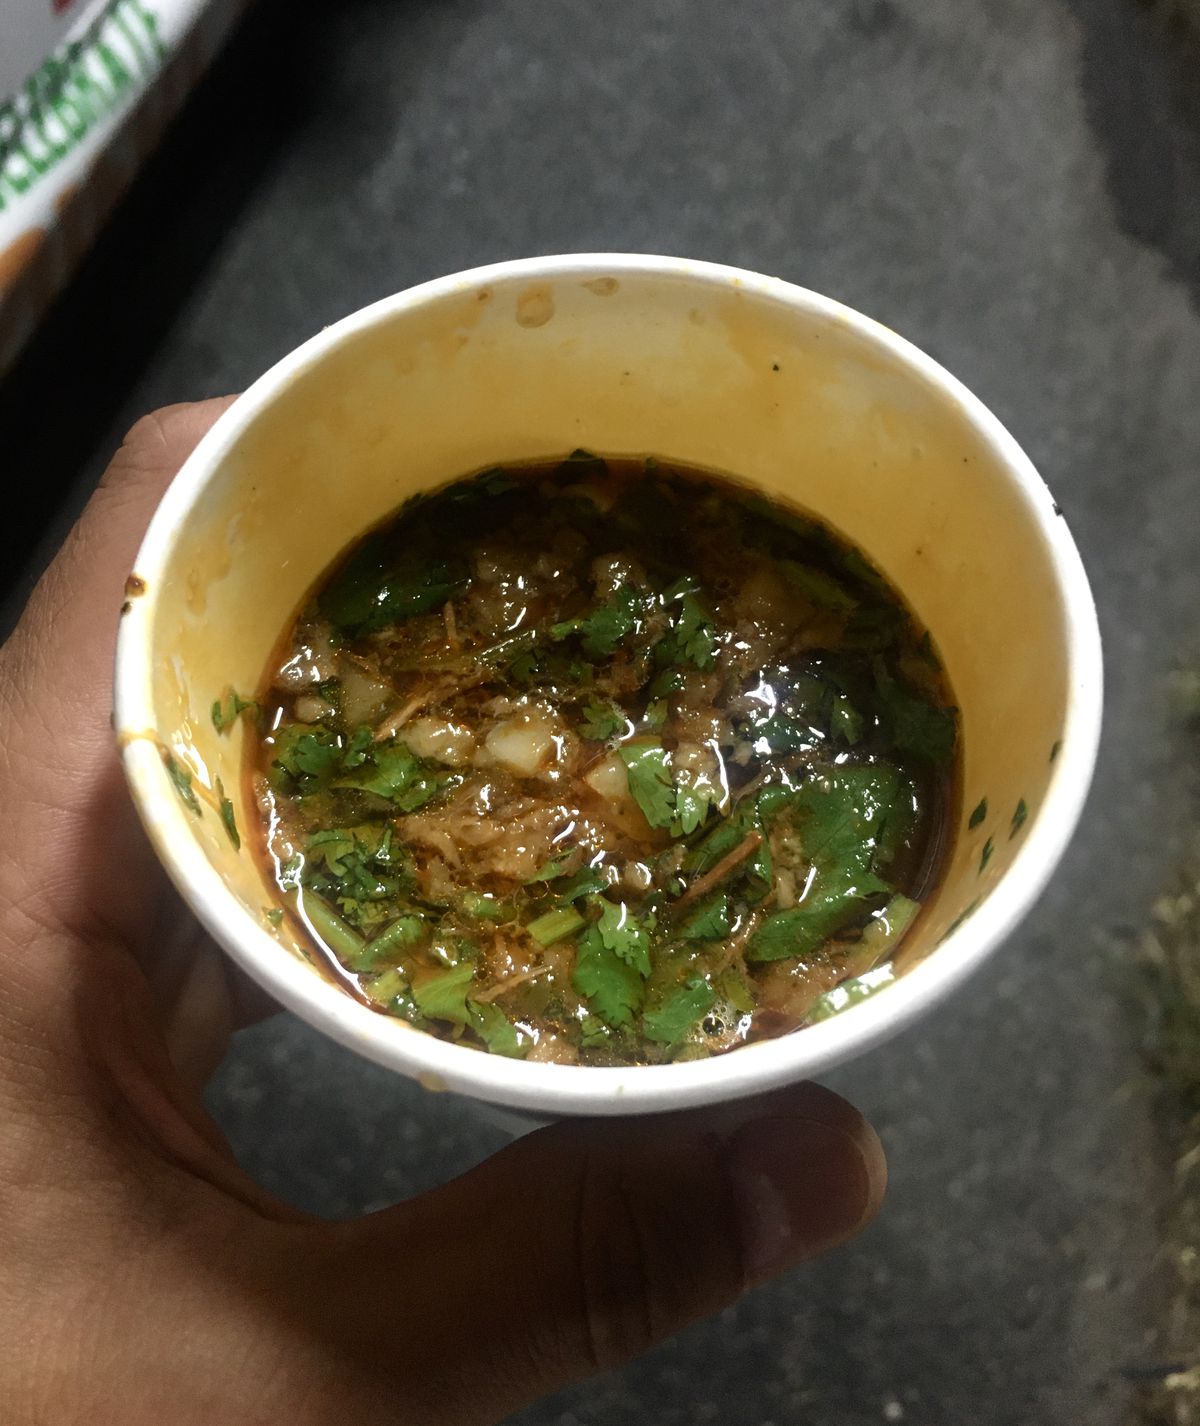 A hand holds a to-go cup of meaty consomme soup with cilantro, onion, and fatty spots swirling about